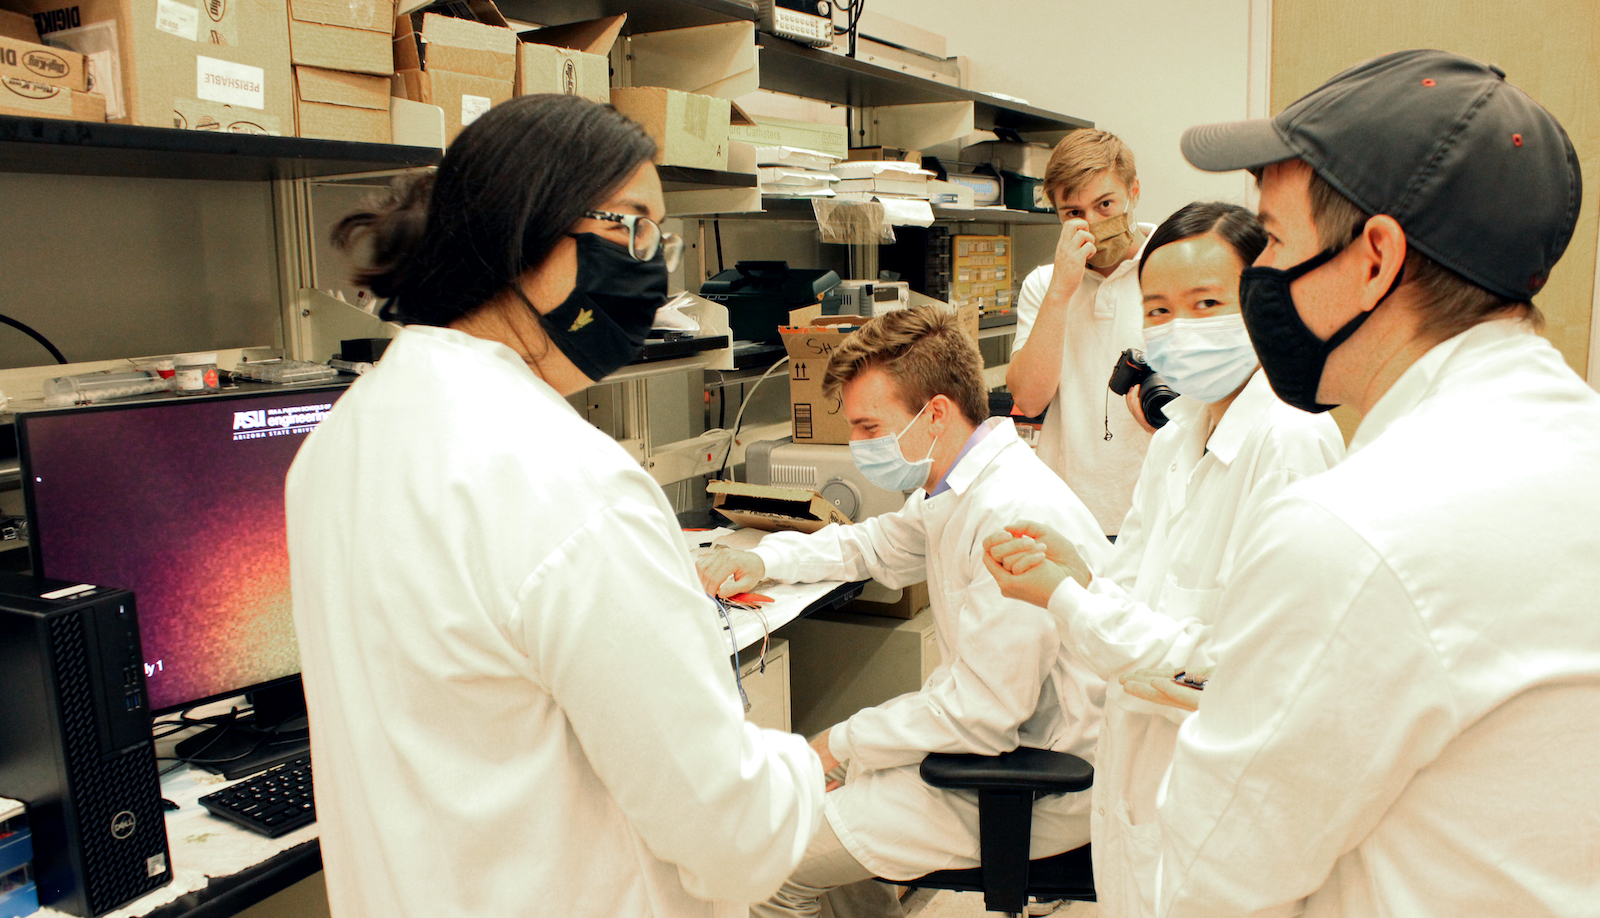 Jennifer Blain Christen and students in a lab